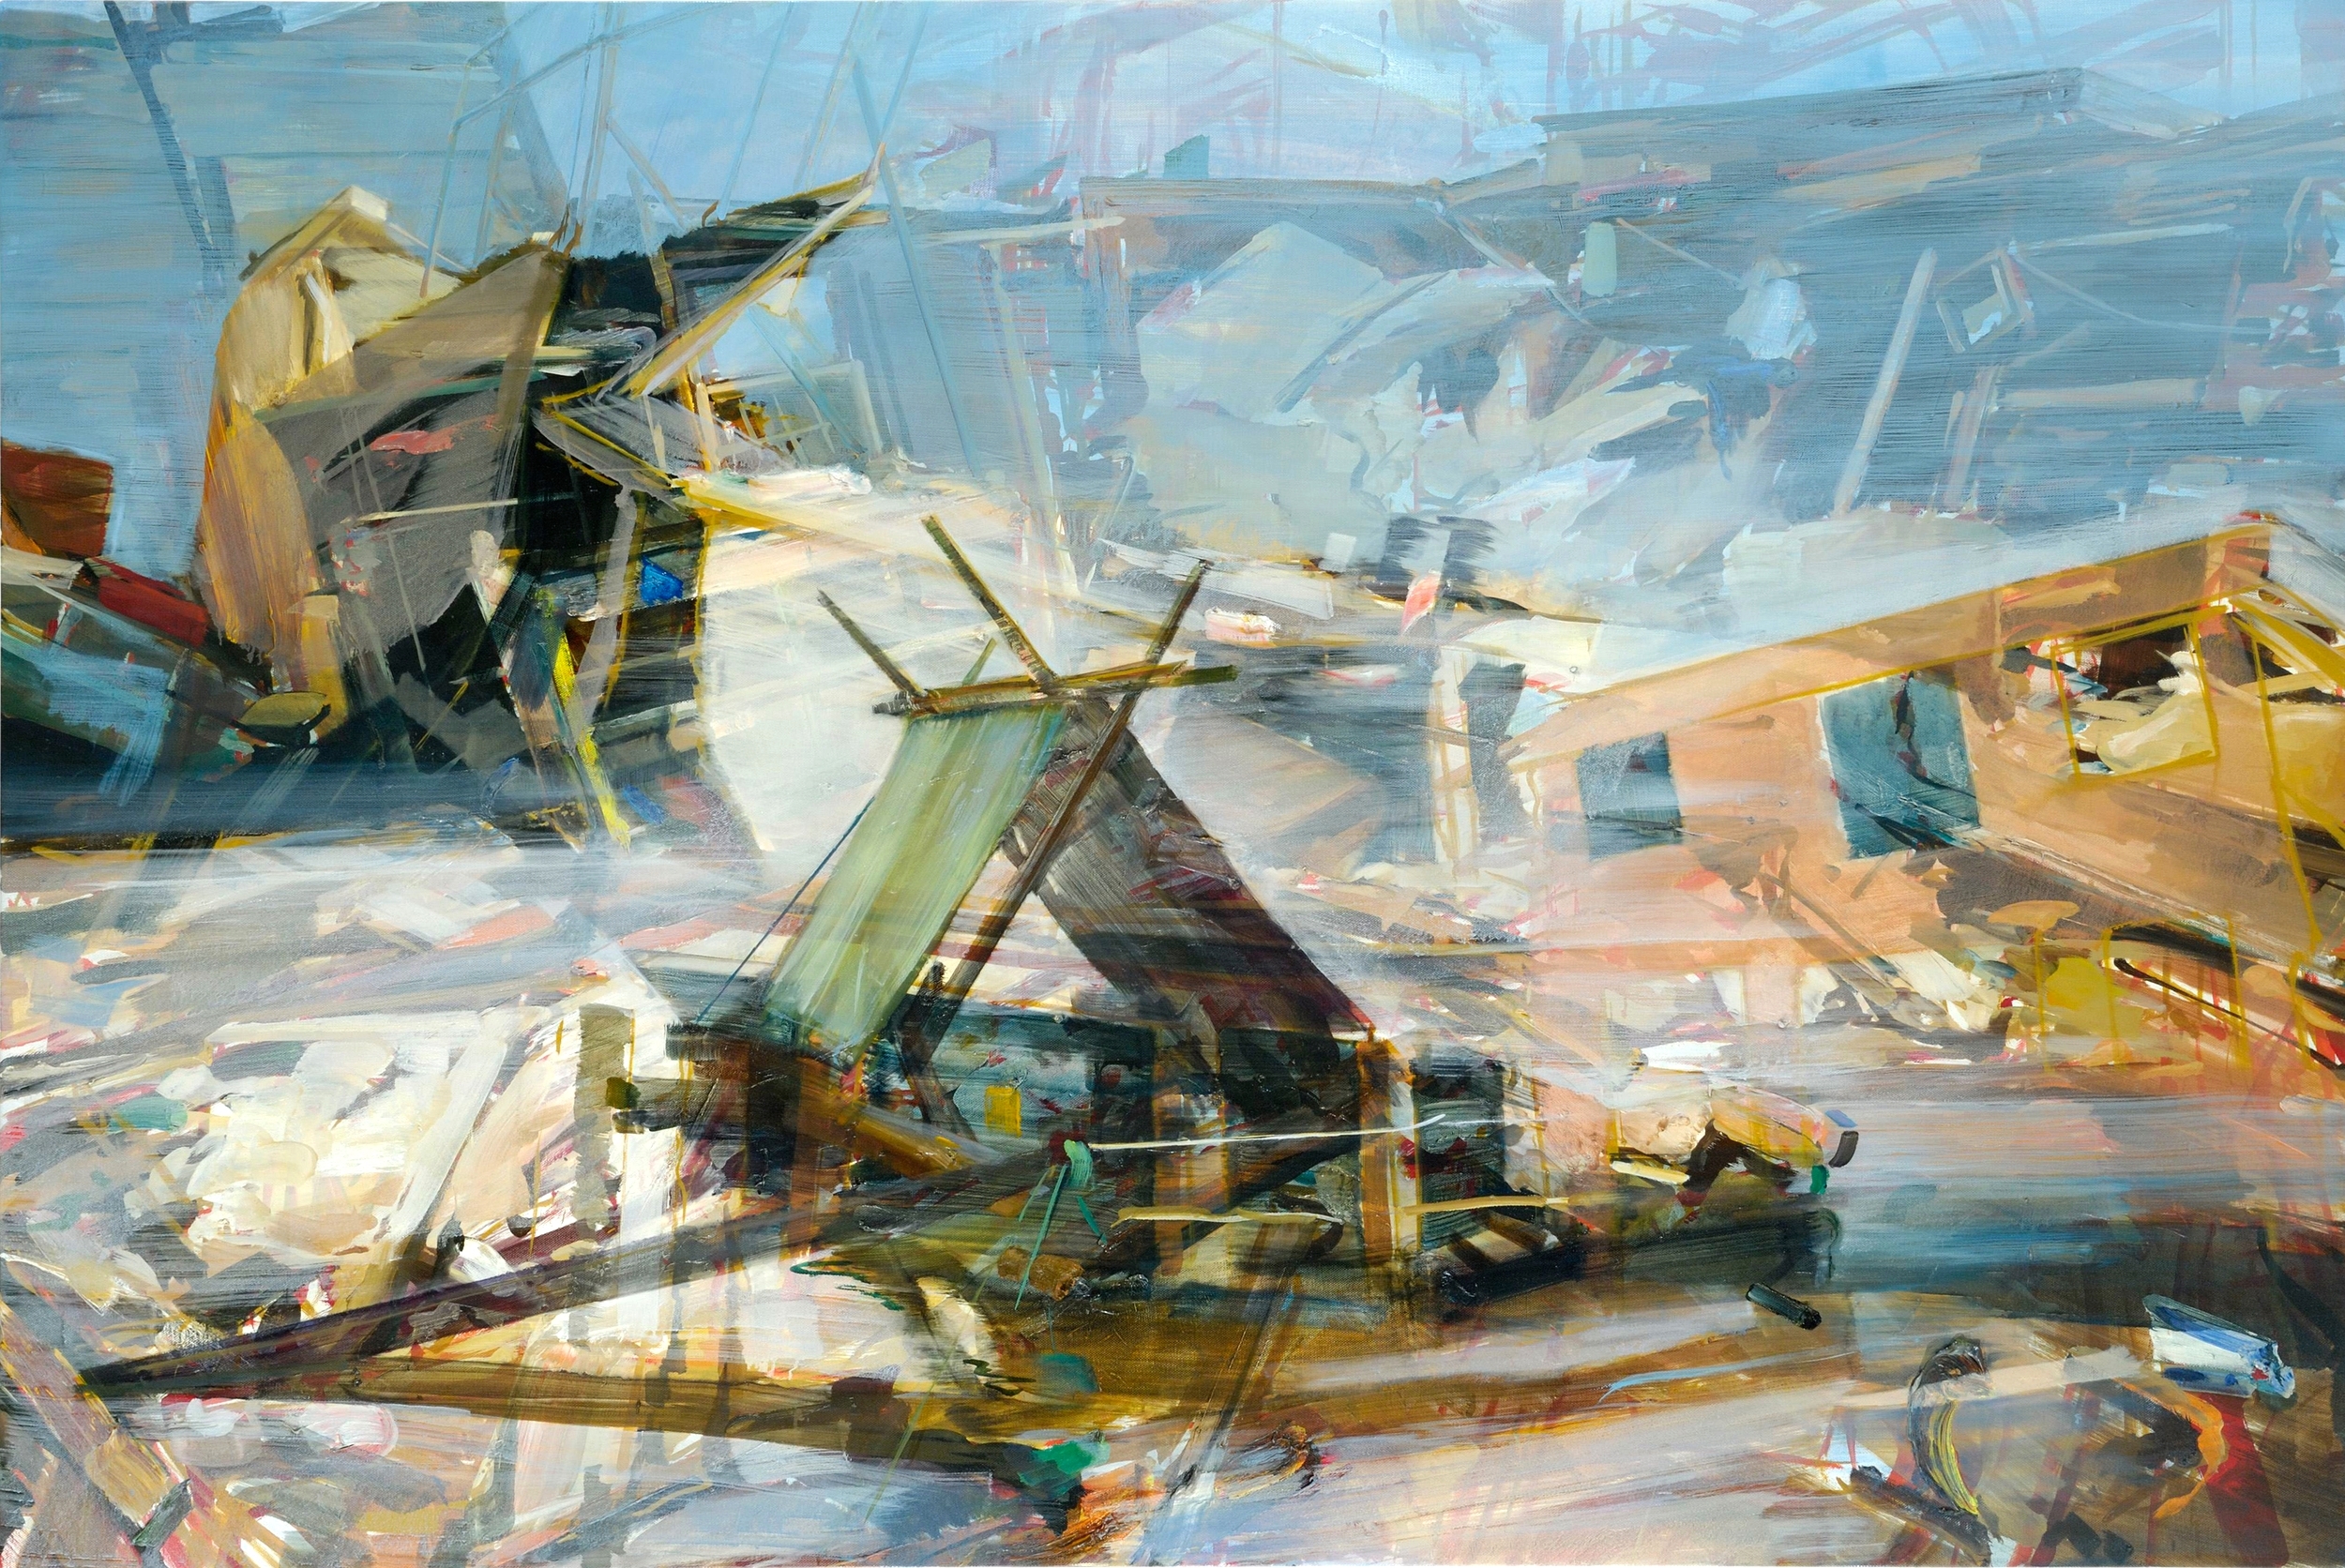   Untitled (mobile home) , 2011, oil on canvas, 135 x 200cm. Private collection ,&nbsp; France 